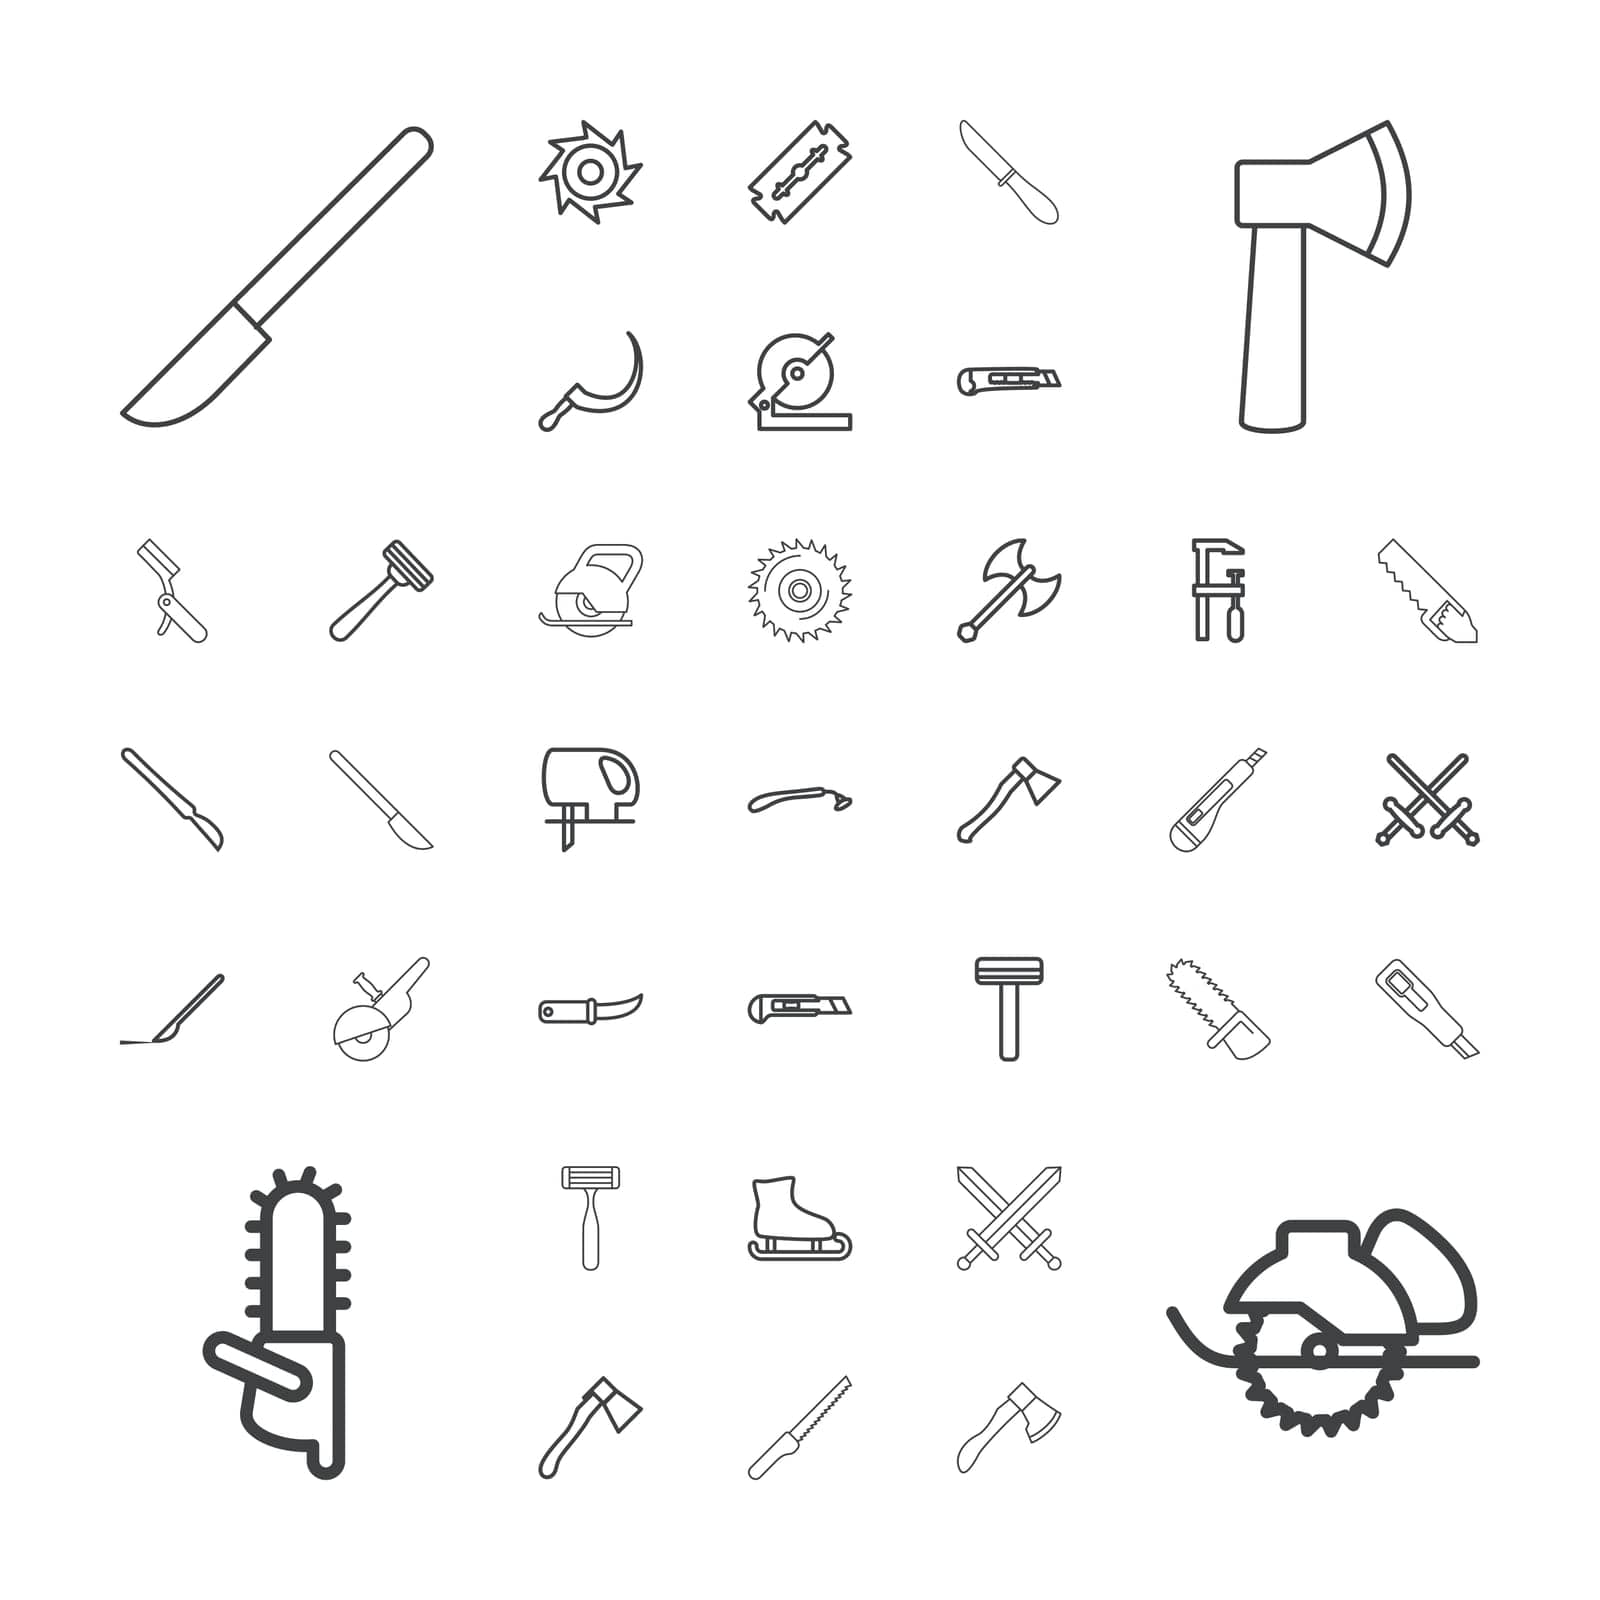 symbol,steel,scythe,cut,gardening,icon,sign,isolated,cutter,ice,blade,axe,weapon,white,chainsaw,flat,design,scalpel,vector,graphic,bllade,set,work,skating,electric,saw,equipment,circular,handle,tool,sharp,sword,knife,background,razor,illustration,object by ogqcorp